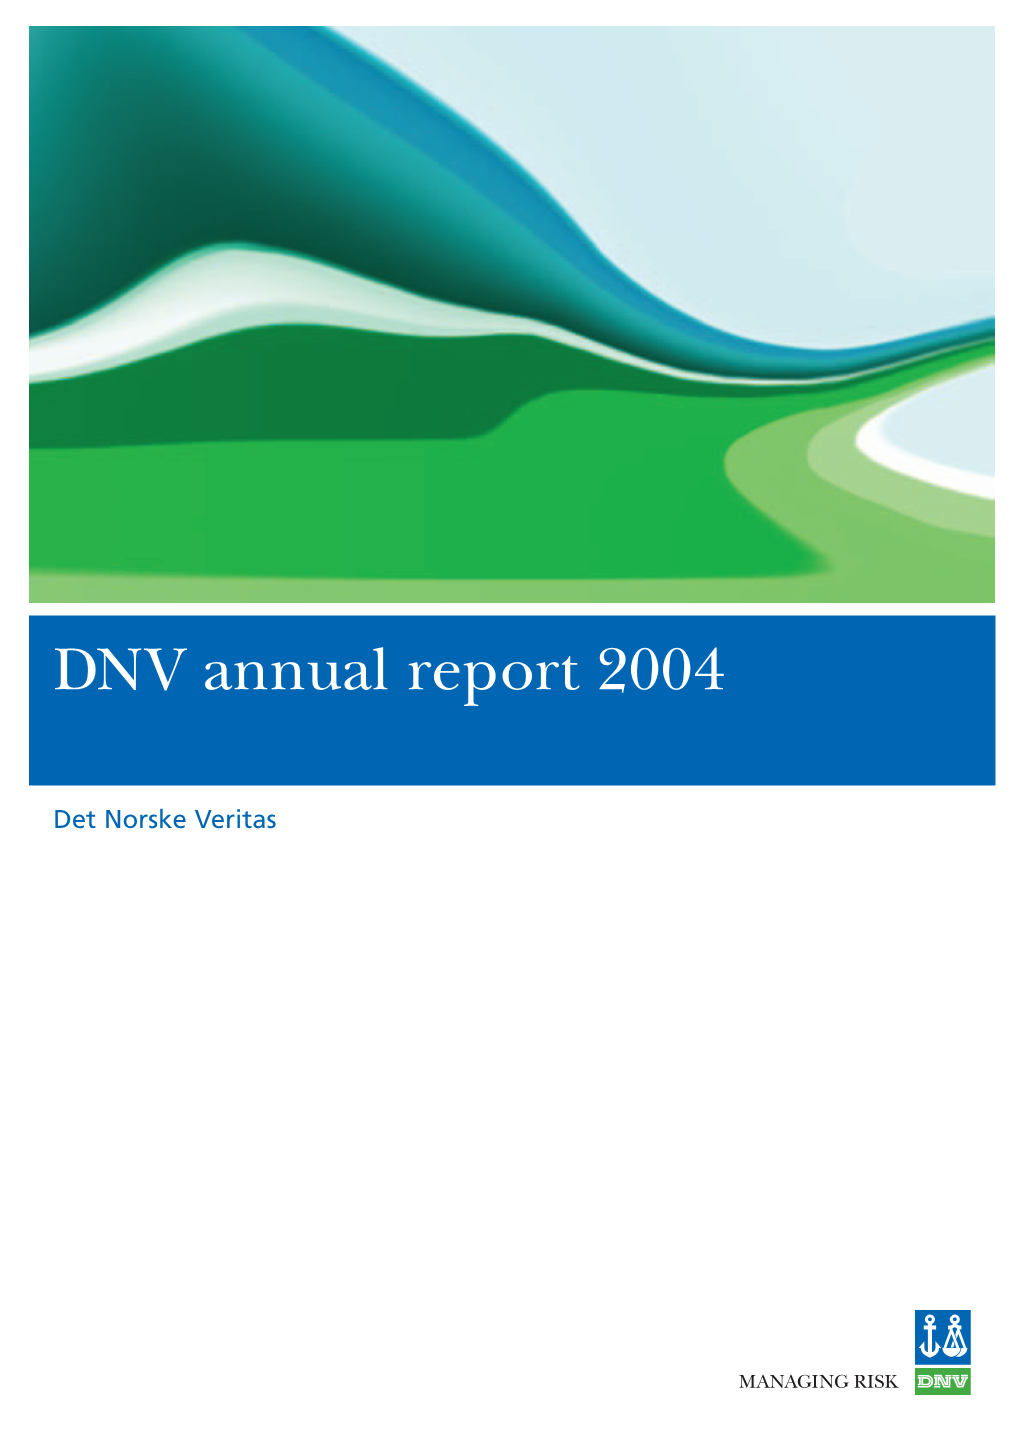 DNV Annual Report 2004